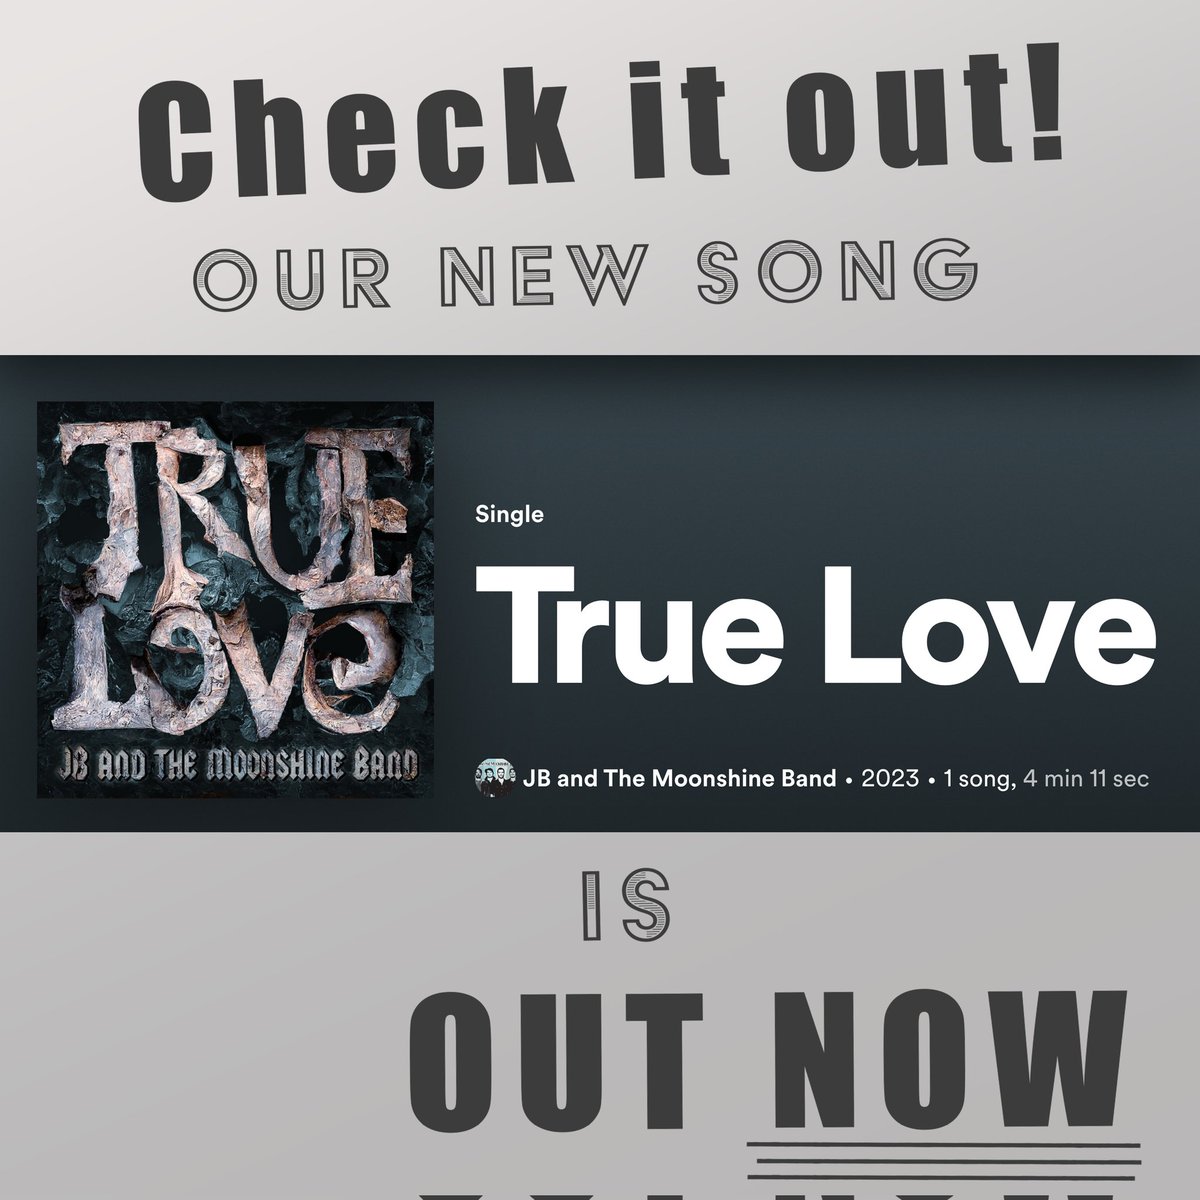 Happy Friday!! Our new song “TRUE LOVE” is out now! 🎉🎶  ffm.to/jbtruelove